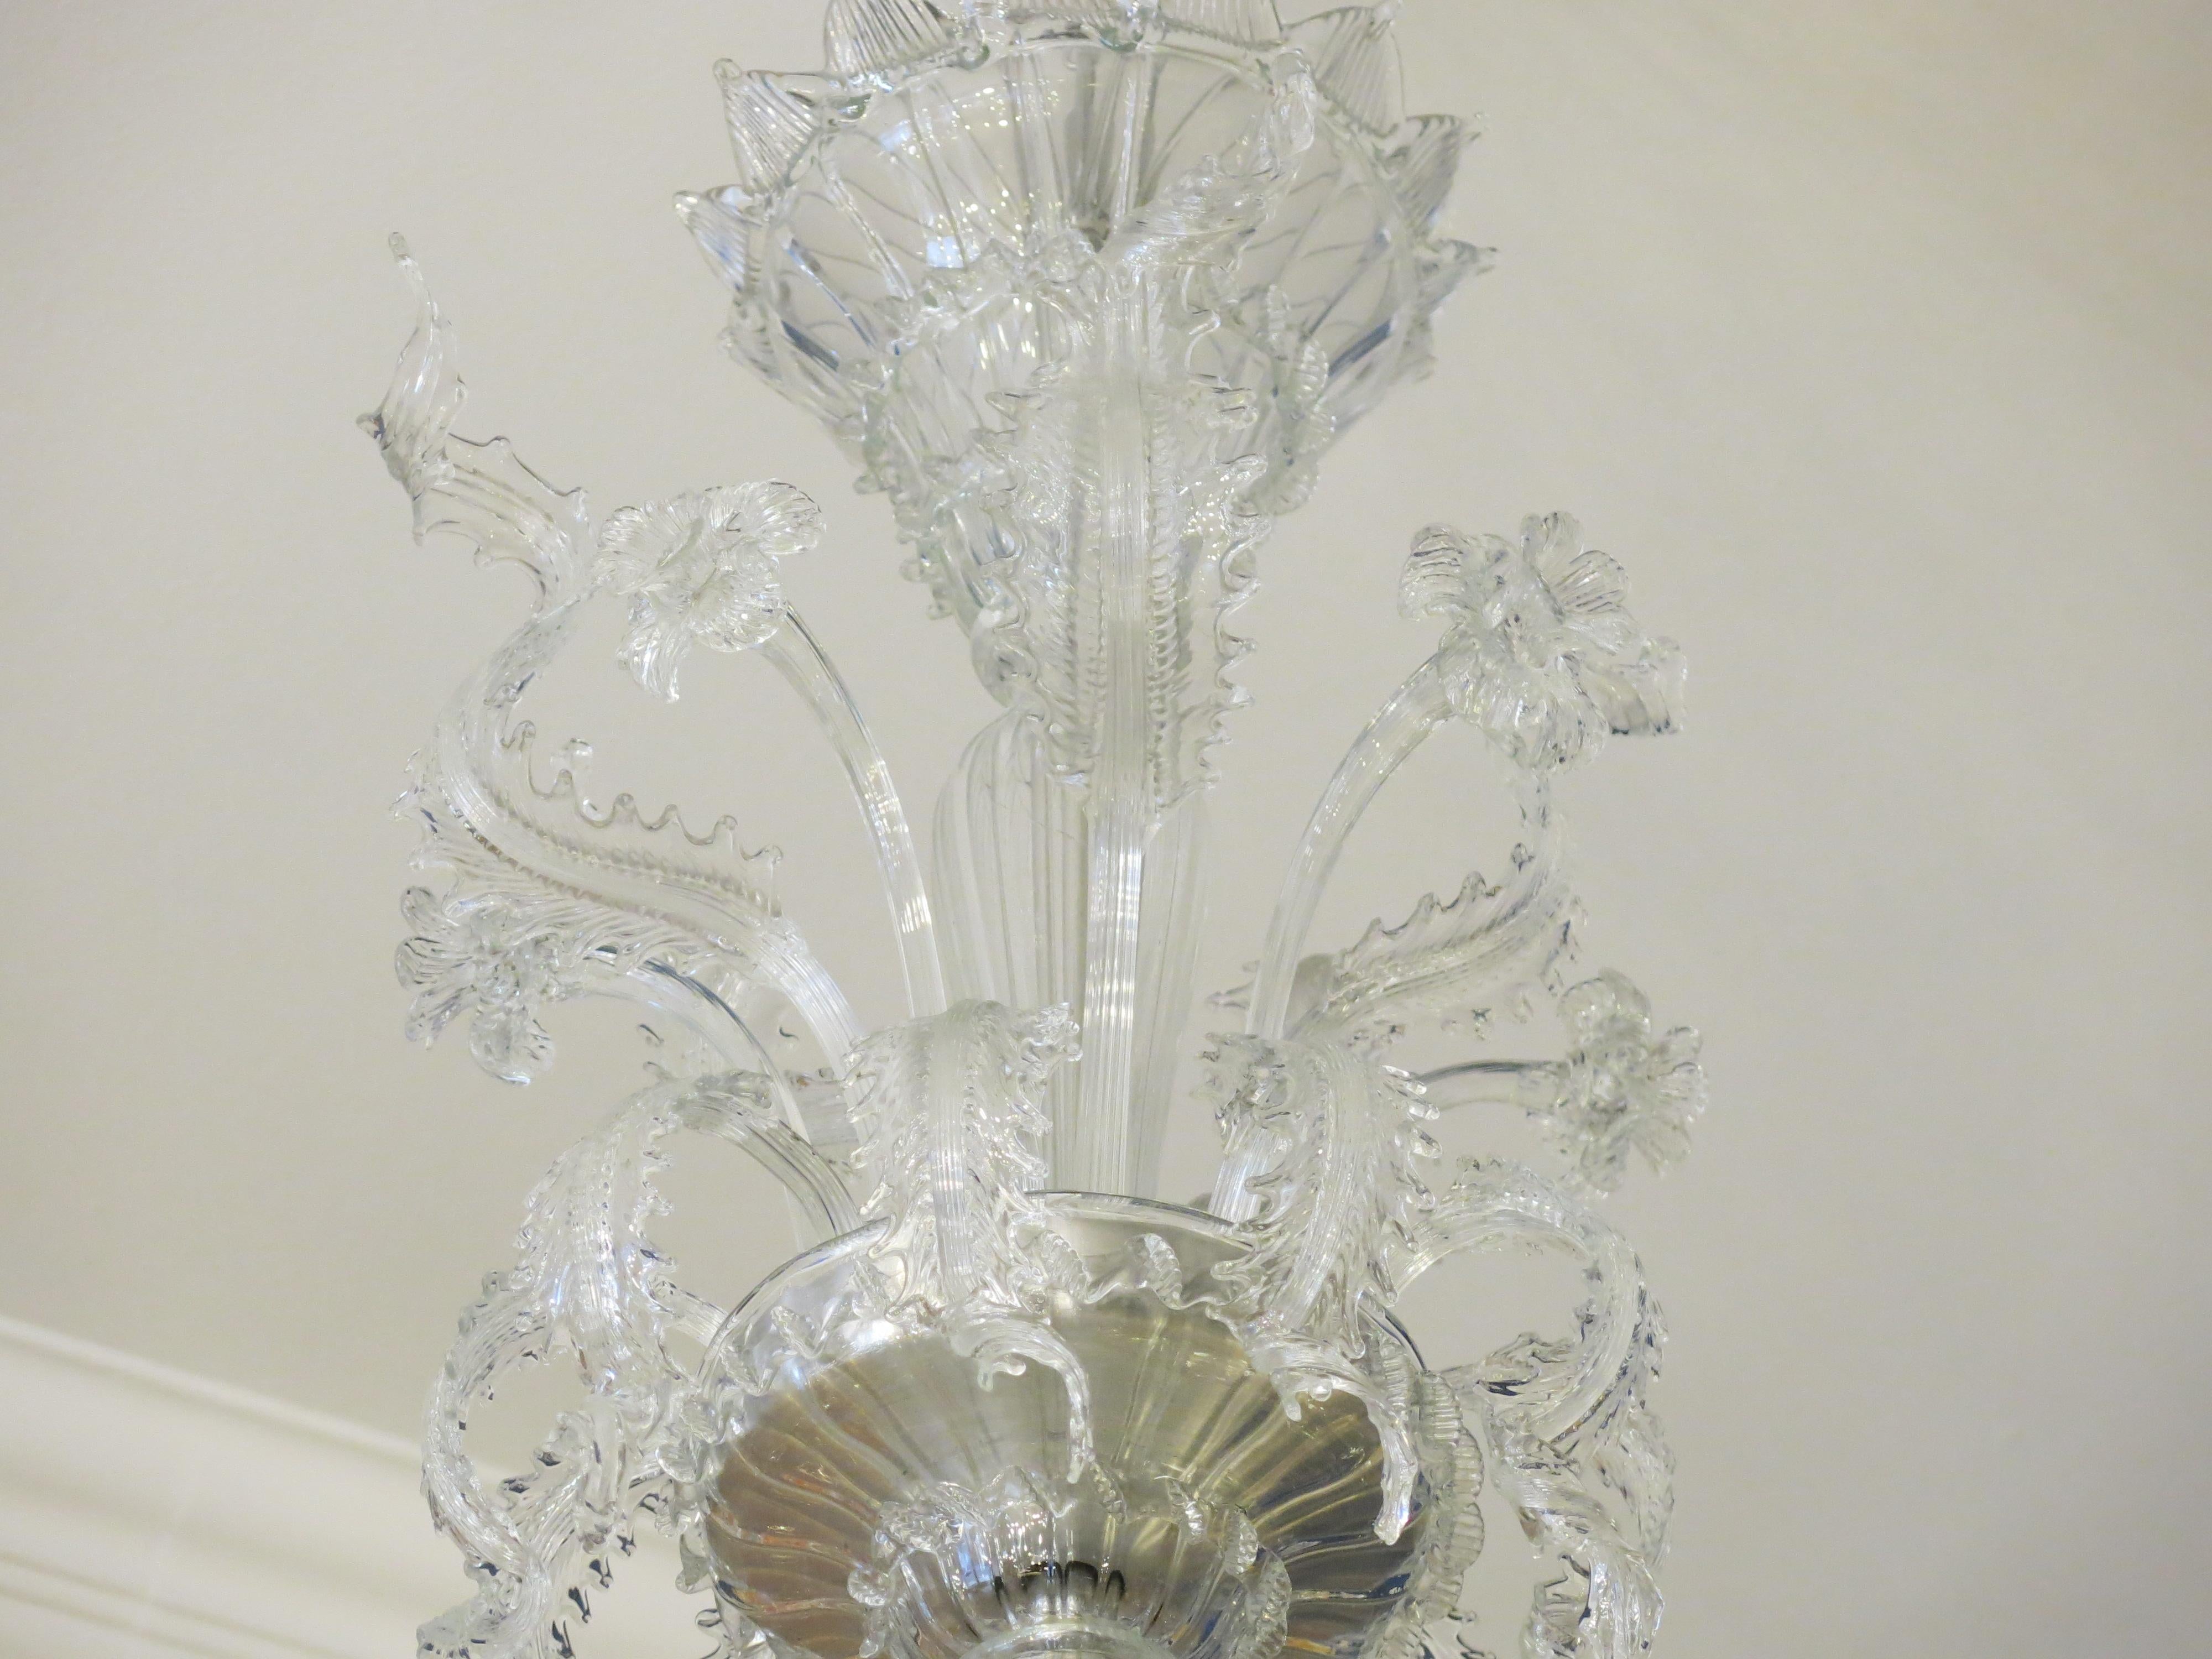 Introducing a magnificent Murano chandelier crafted by the renowned Archimede Seguso during the years 1960-1965. This exquisite piece embodies the epitome of Murano glass craftsmanship, showcasing Seguso's mastery of glass artistry. In excellent